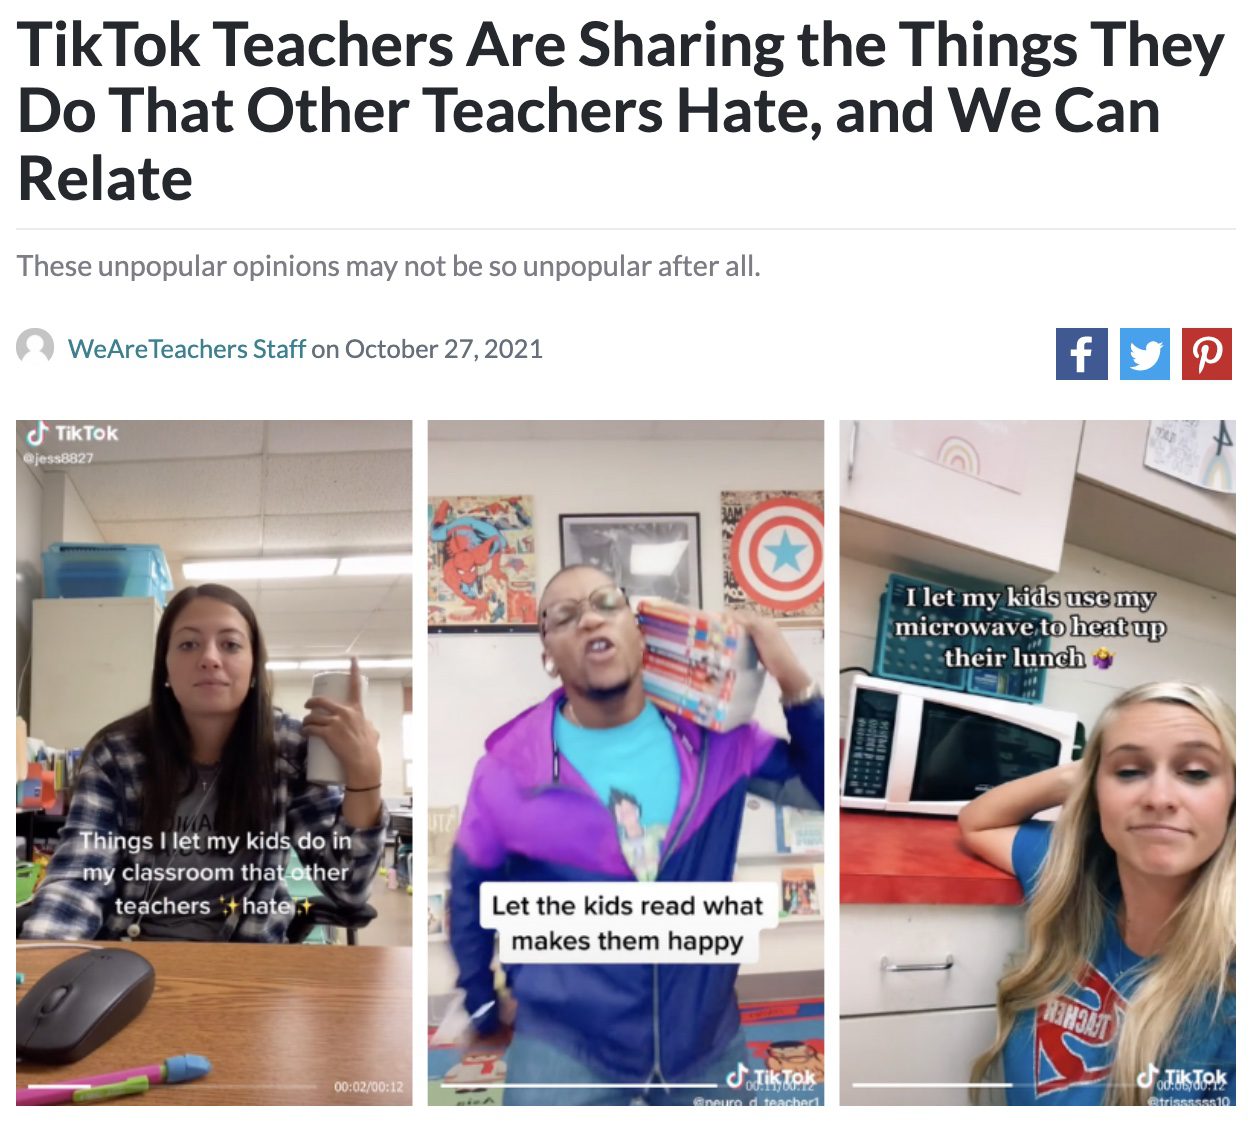 Screencap of an article about teachers on TikTok sharing things they let students do